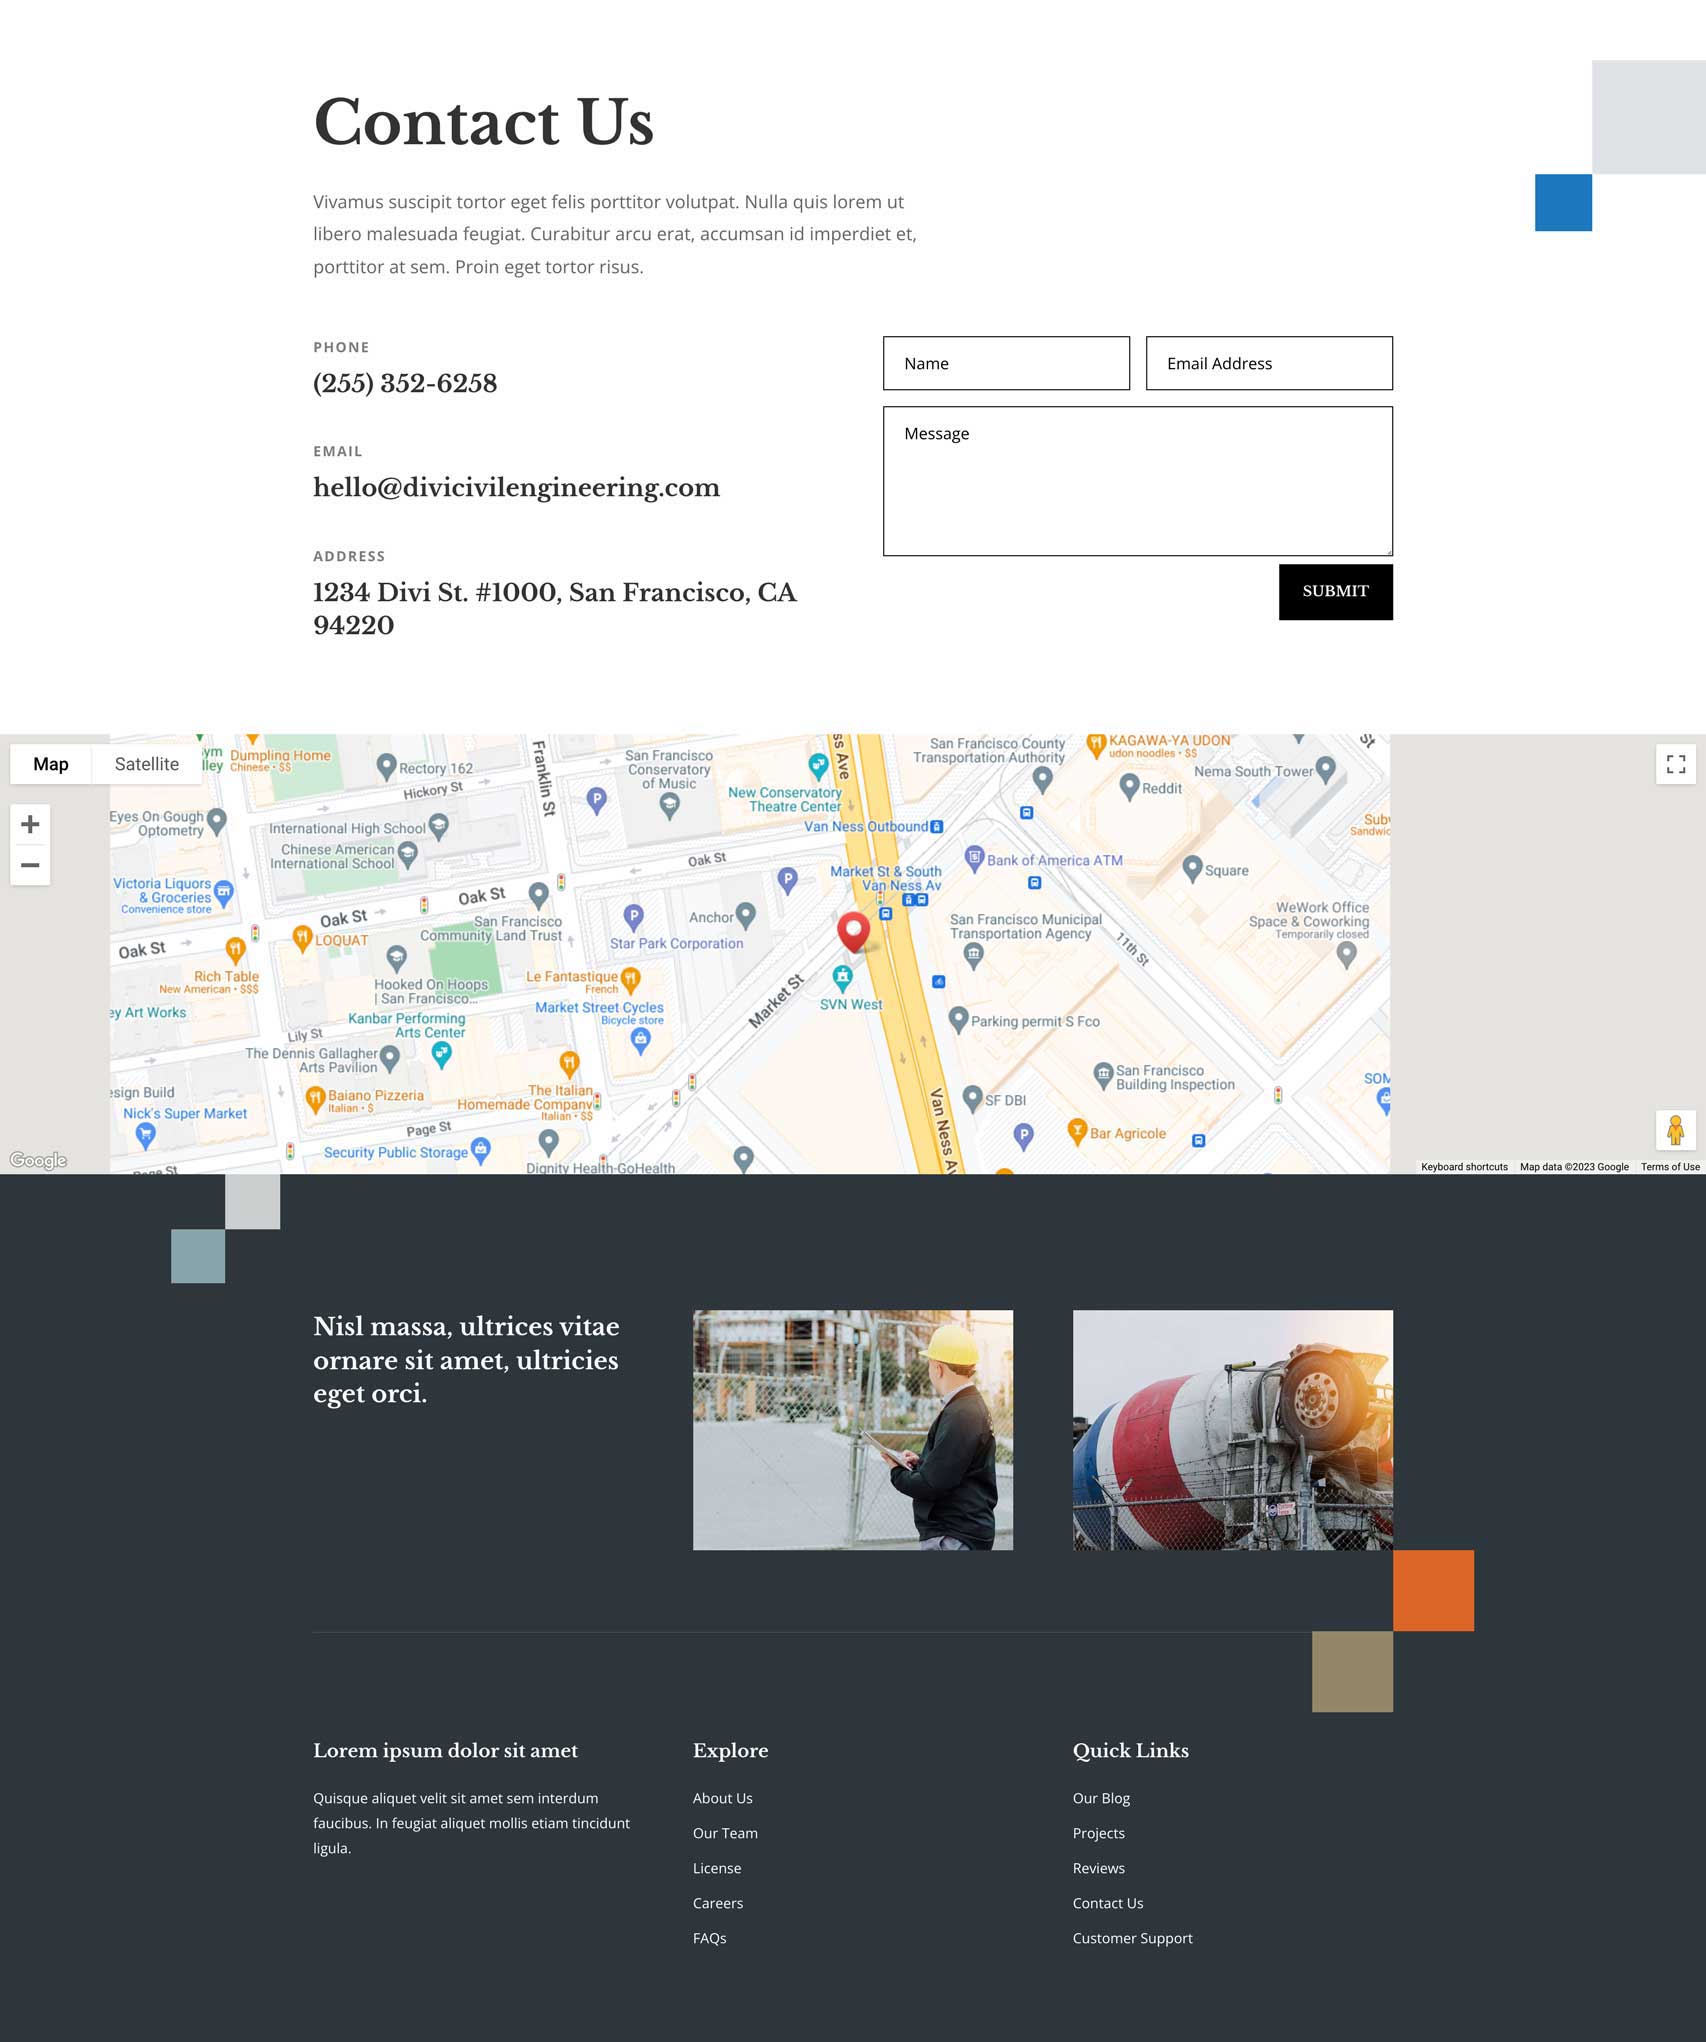 Civil Engineering Firm Layout Pack for Divi